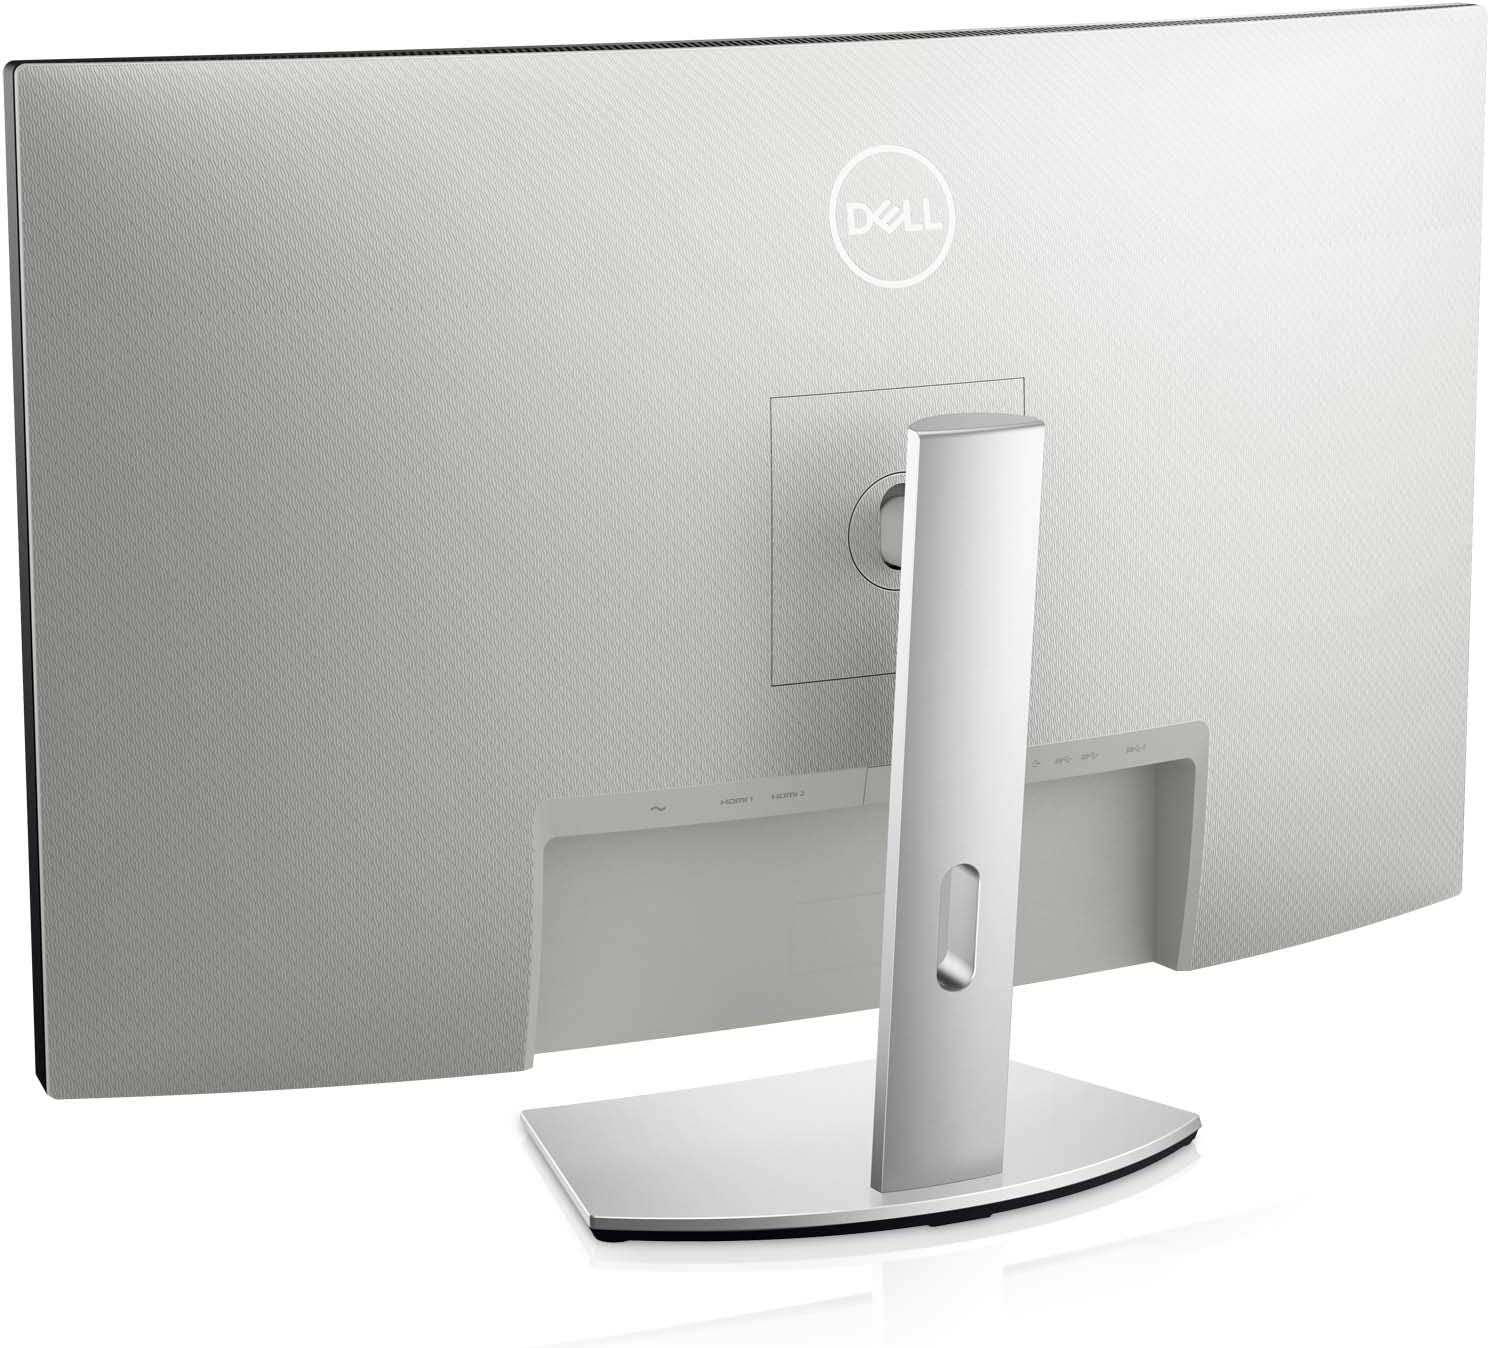 Review of the Dell 4K S3221QS Curved Monitor